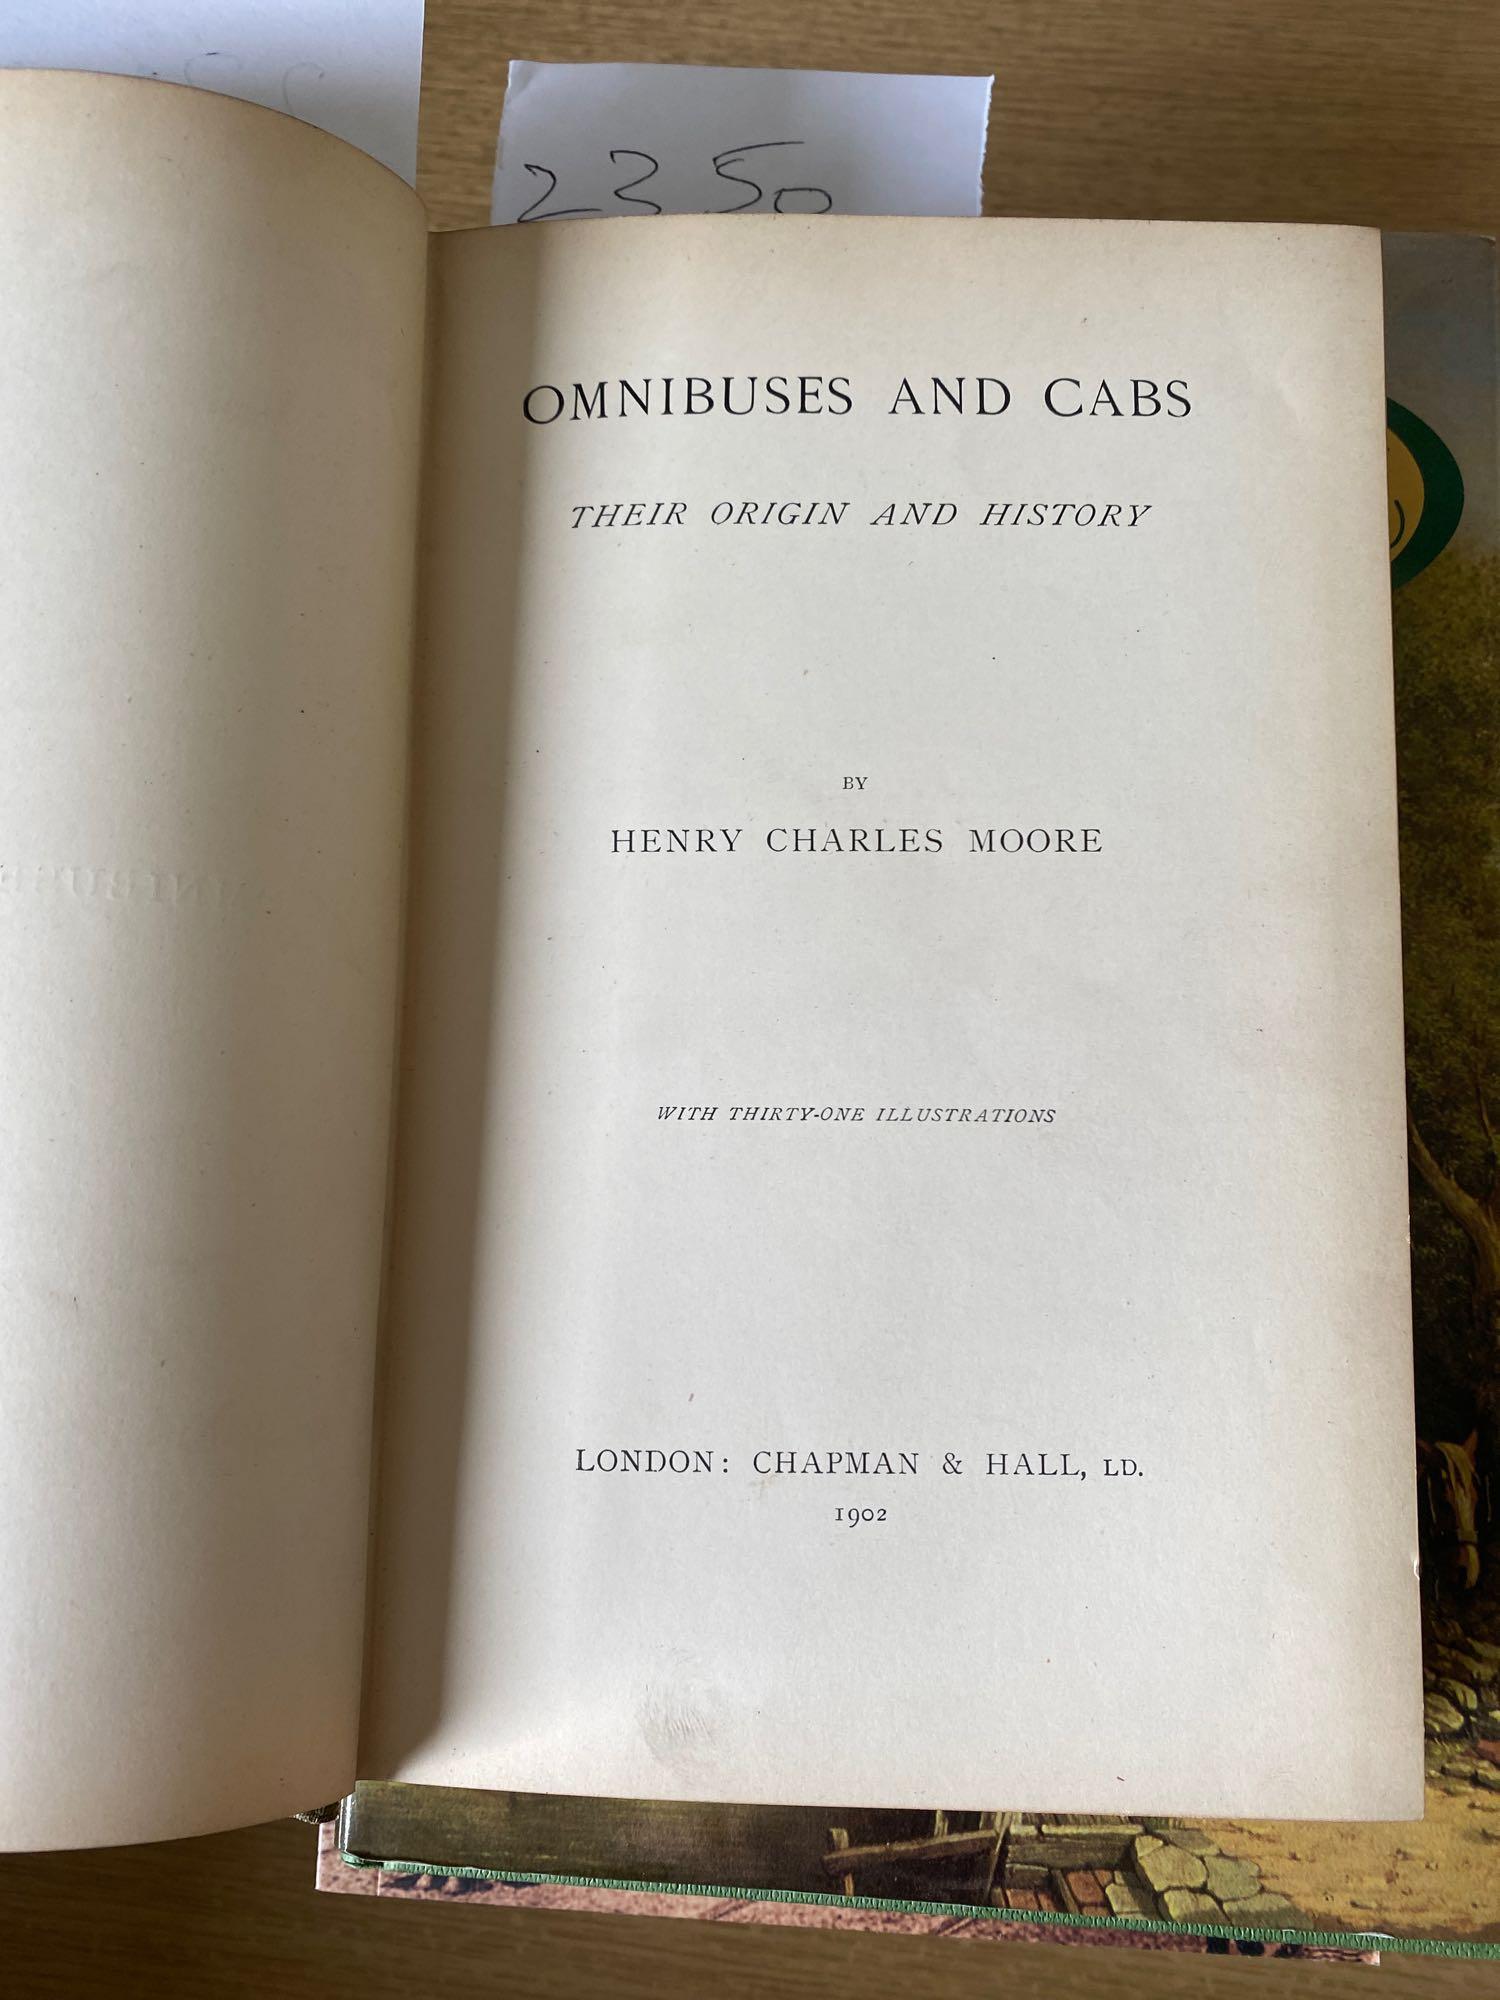 Omnibuses & Cabs by H C Moore, Chapman & Hall 1902, and four other books - Image 2 of 6